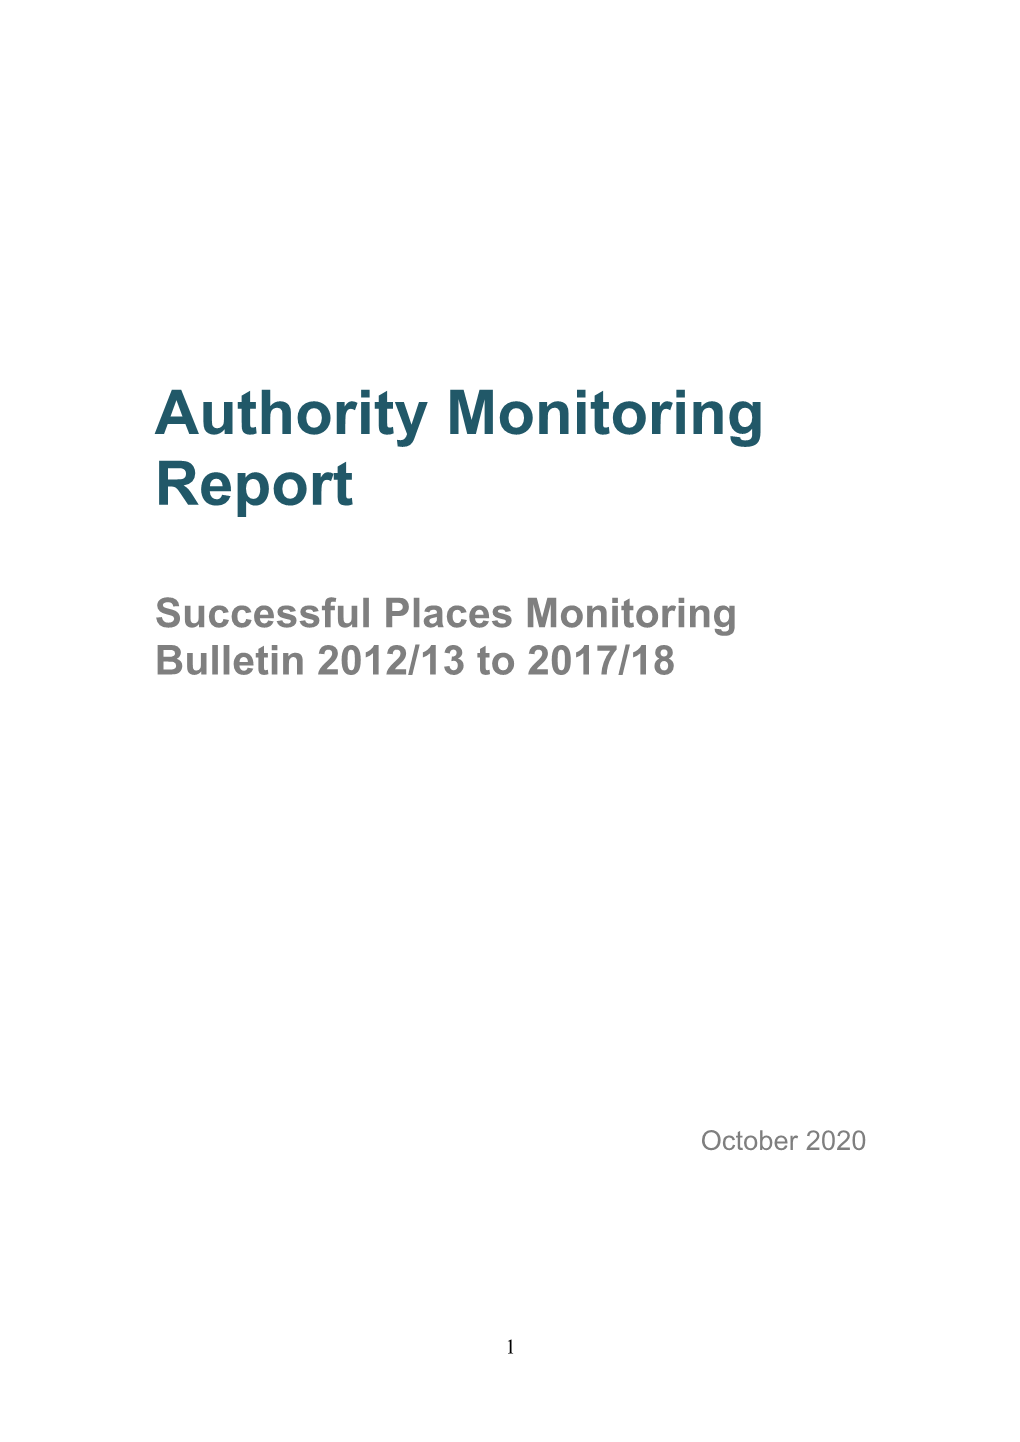 Successful Places Monitoring Bulletin 2012/13 to 2017/18